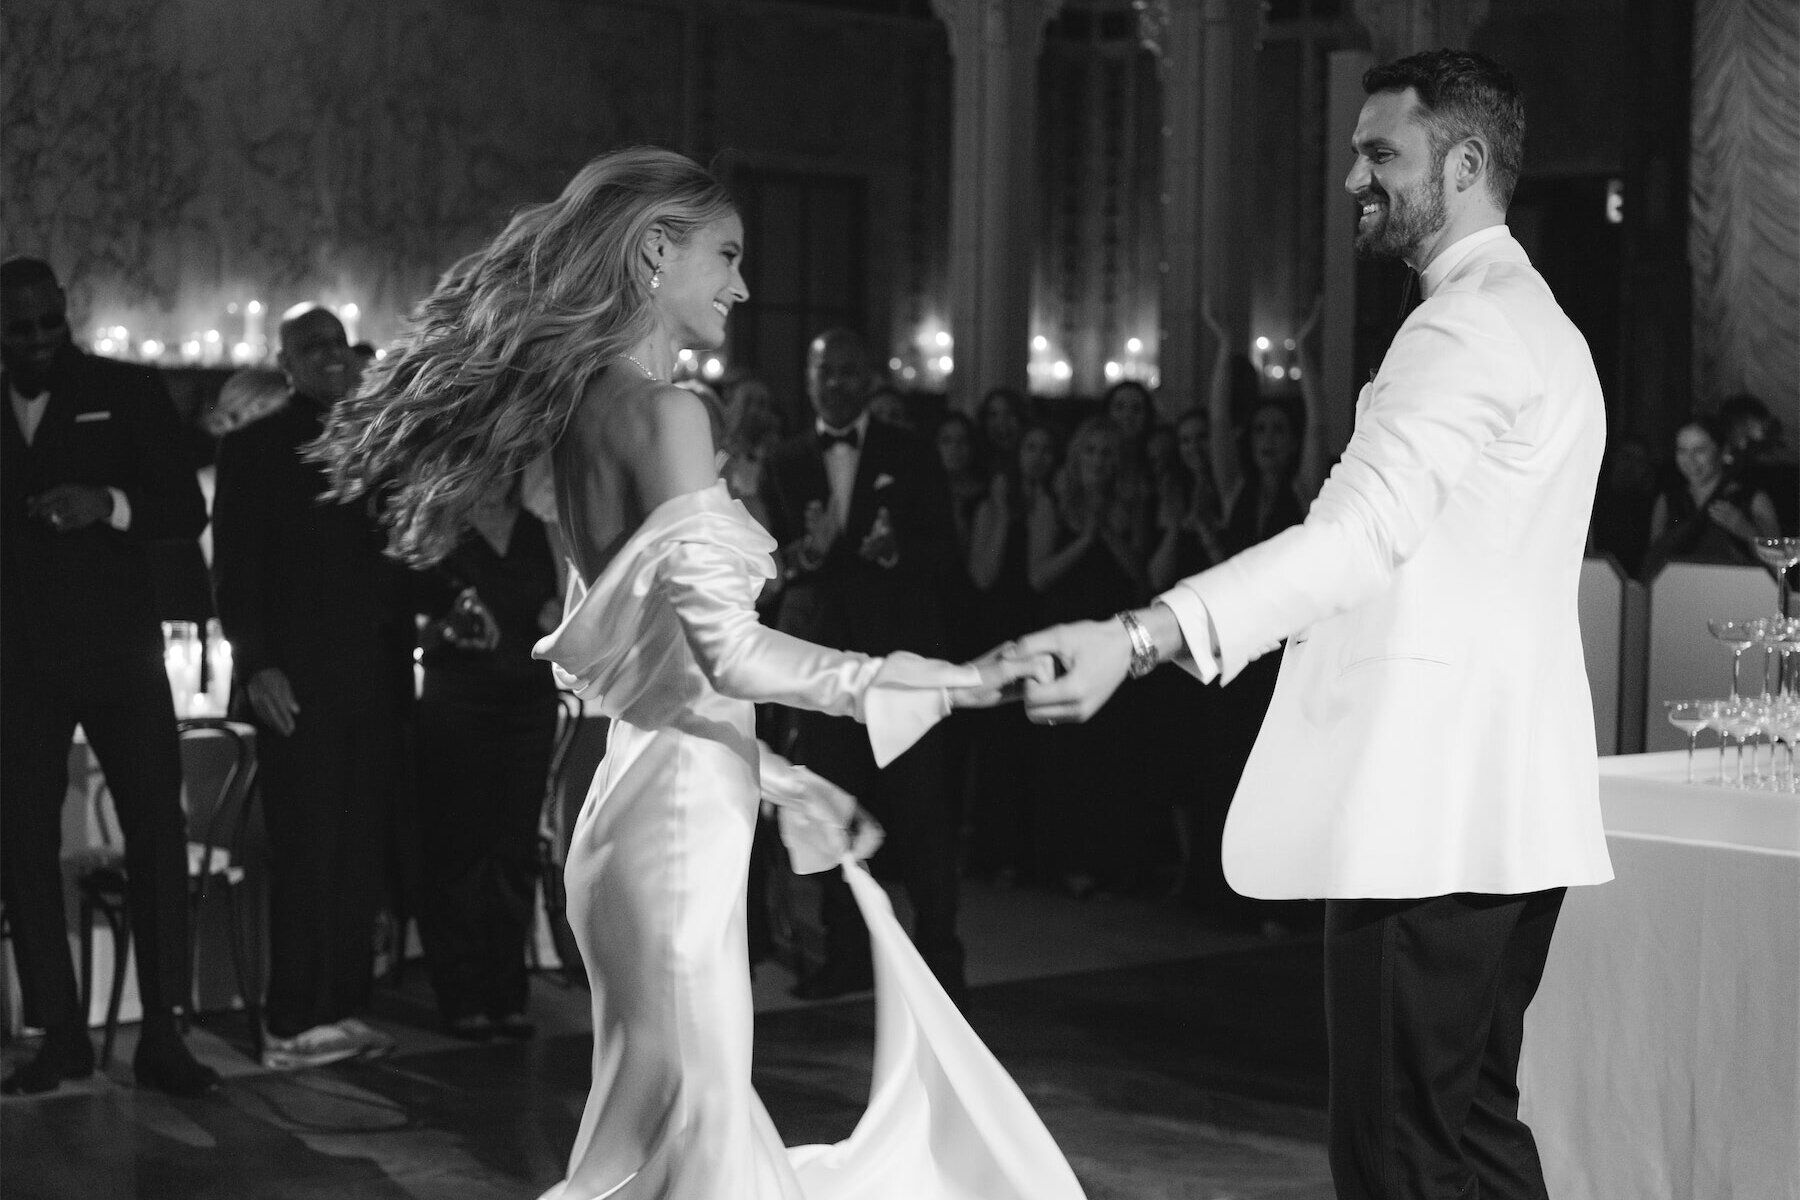 Kate Bock Kevin Love Wedding: Kate Bock and Kevin Love dancing at their wedding reception.